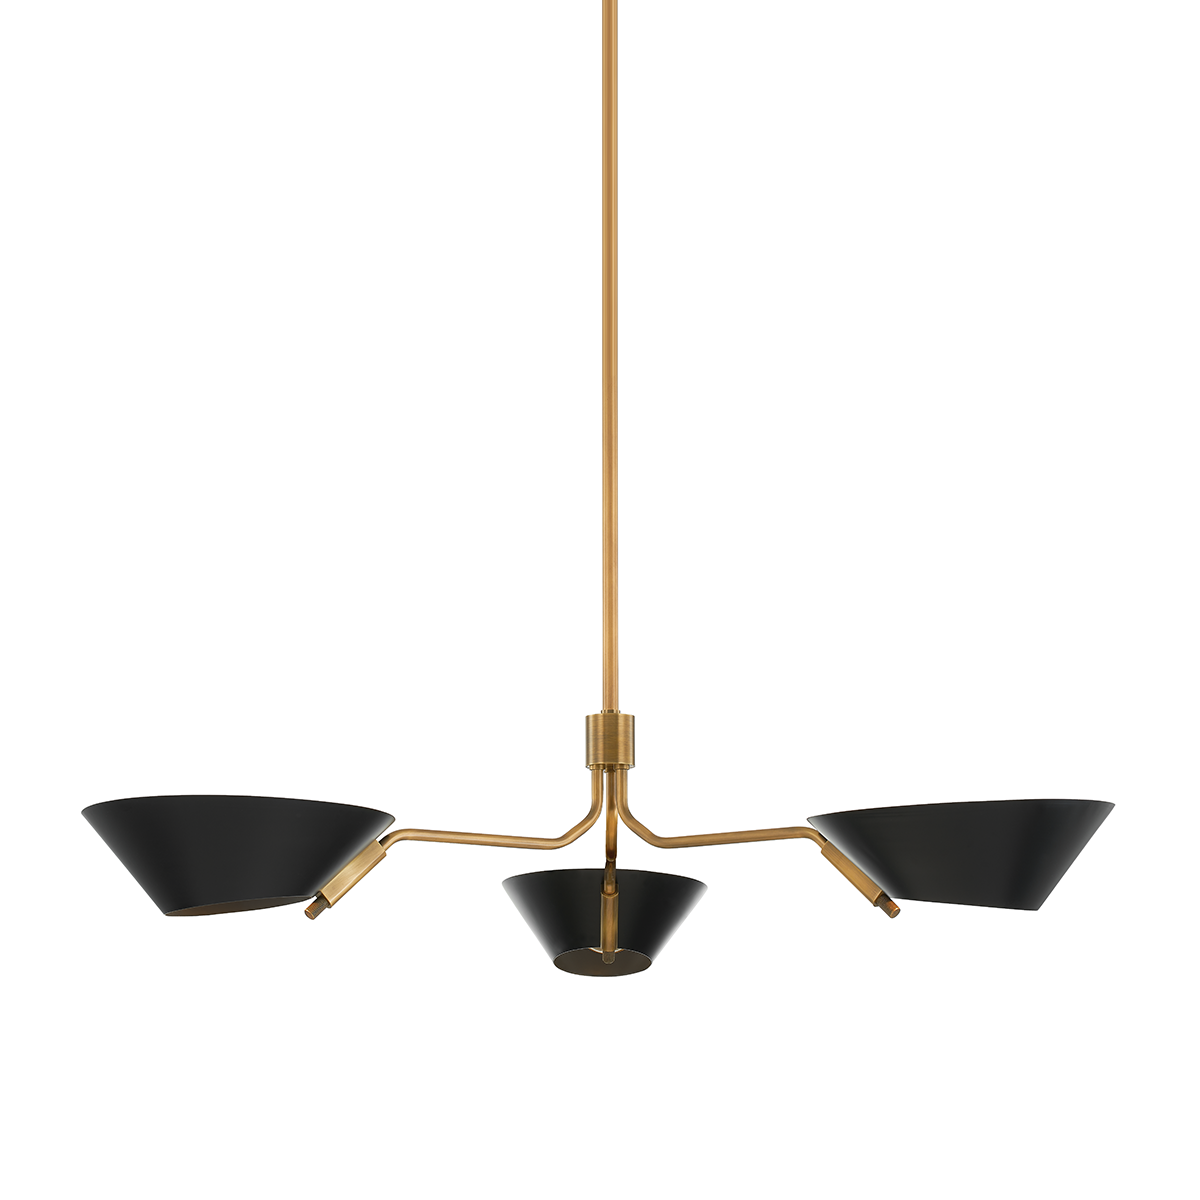 Patina Brass Arms with Metal Shades Chandelier